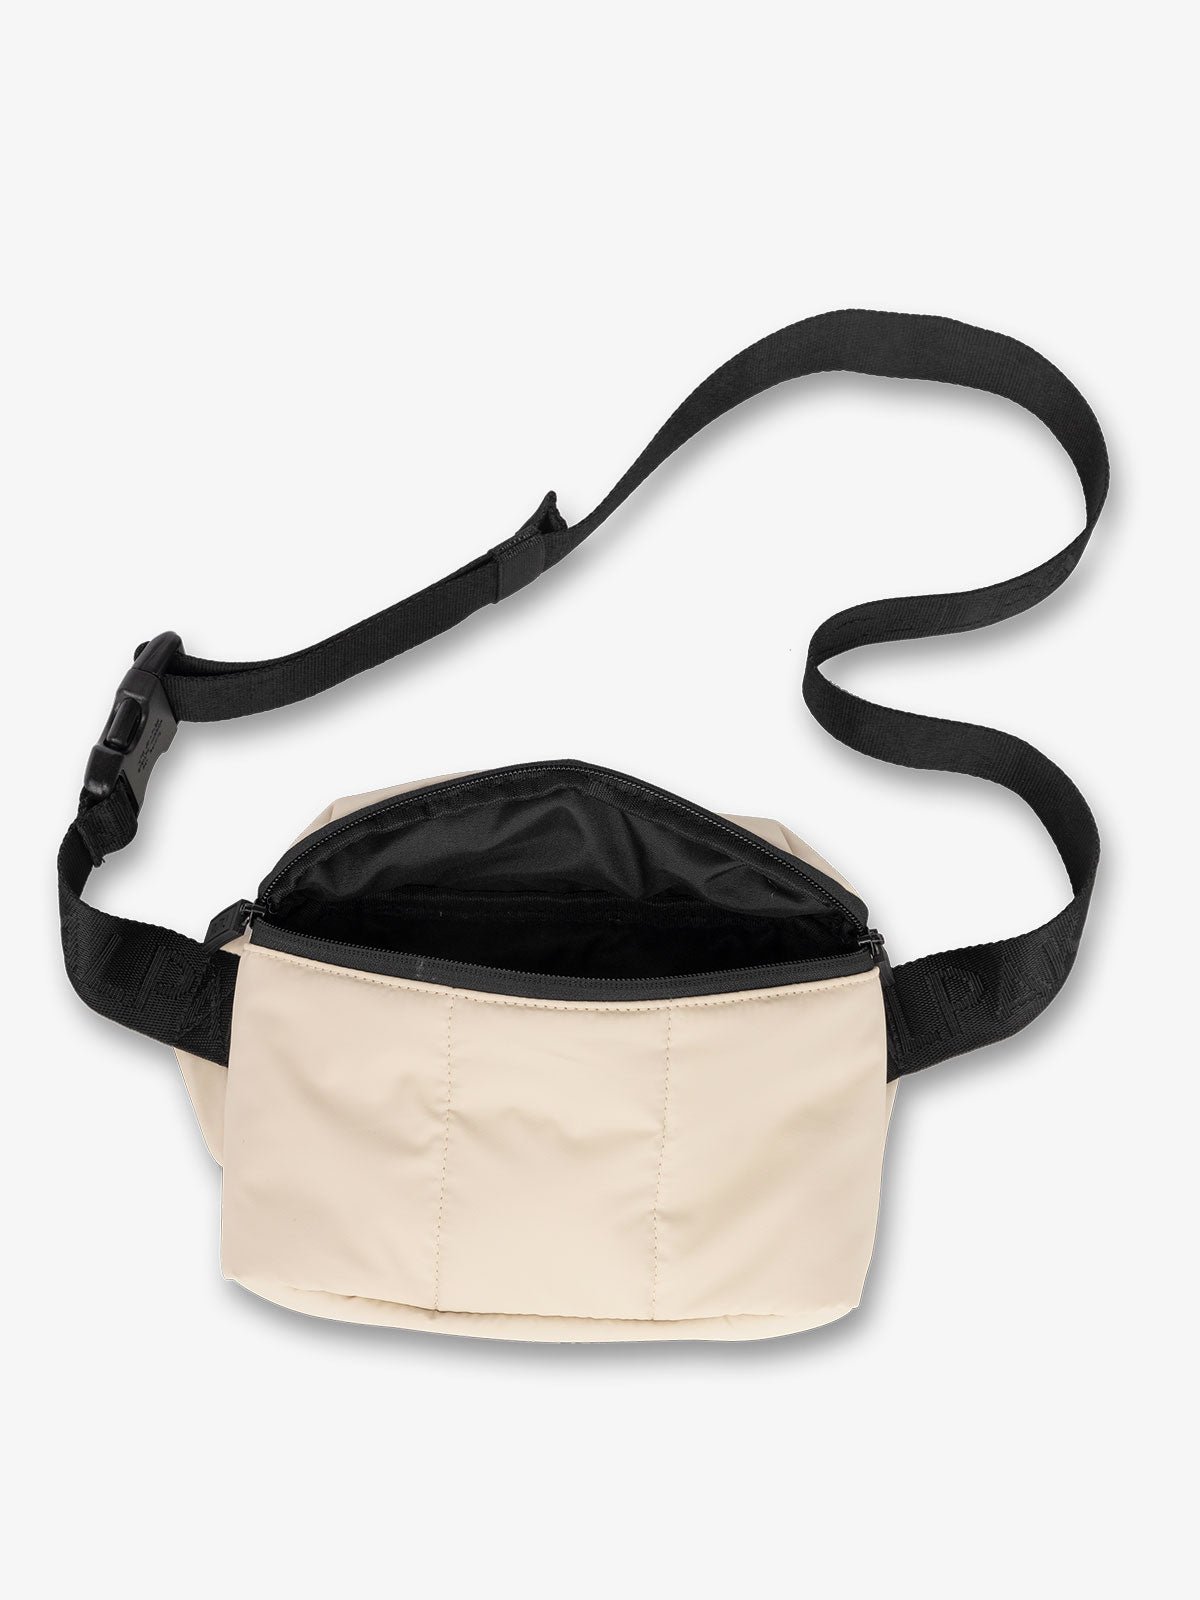 CALPAK Luka mini crossbody fanny pack with soft water-resistant exterior and adjustable strap in oatmeal